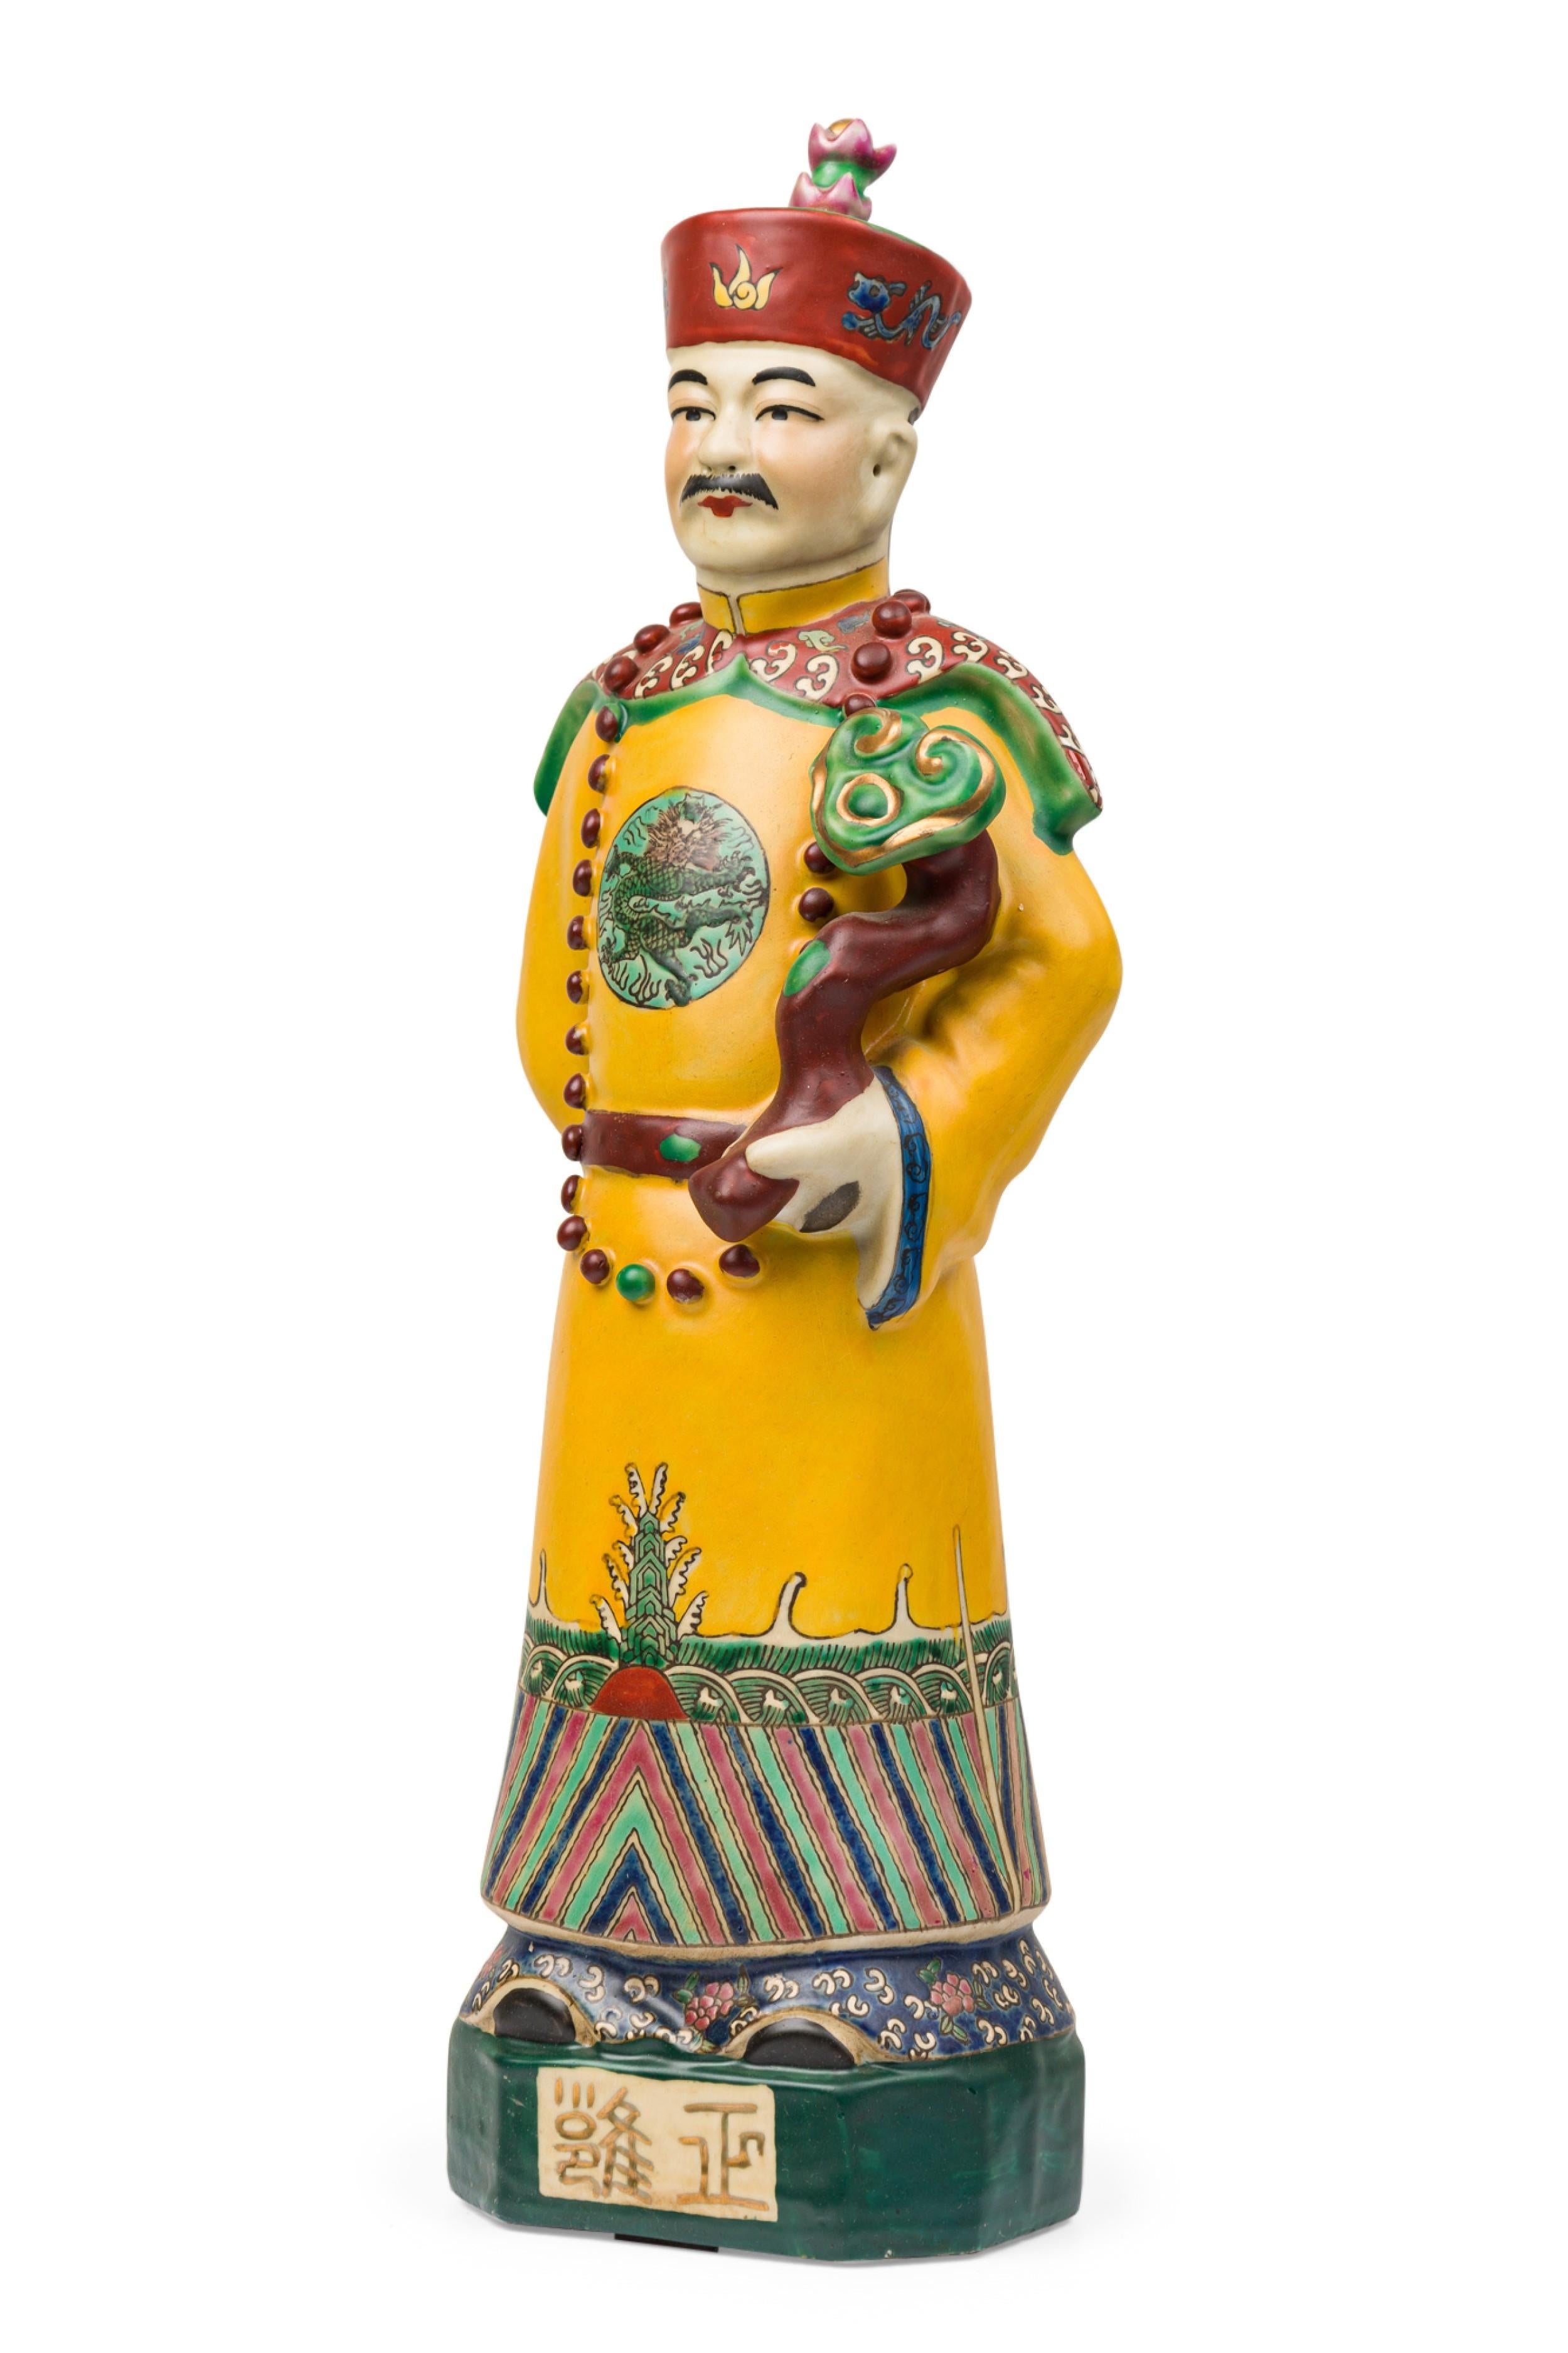 Pair of Chinese Painted Ceramic Figures Depicting a Yellow Robed Emperor For Sale 1